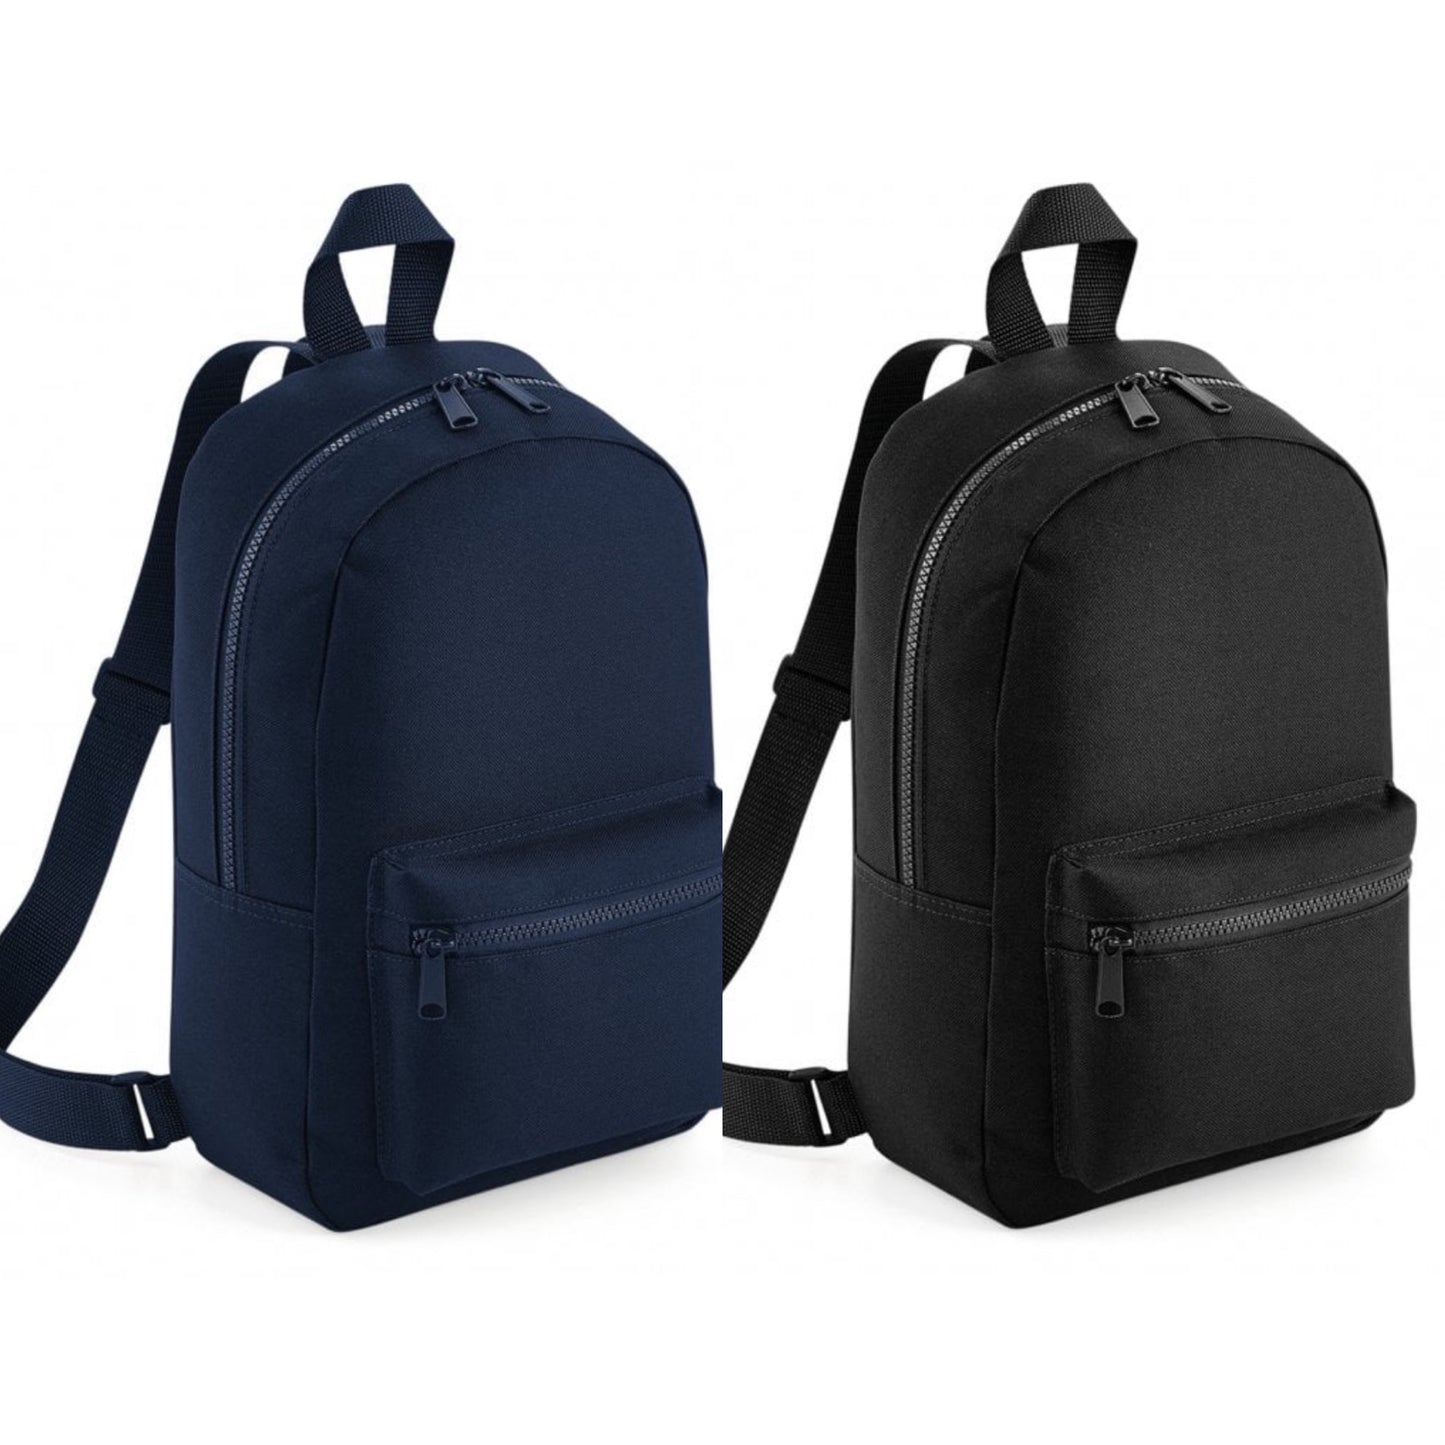 Personalised Paint Smudge Backpacks